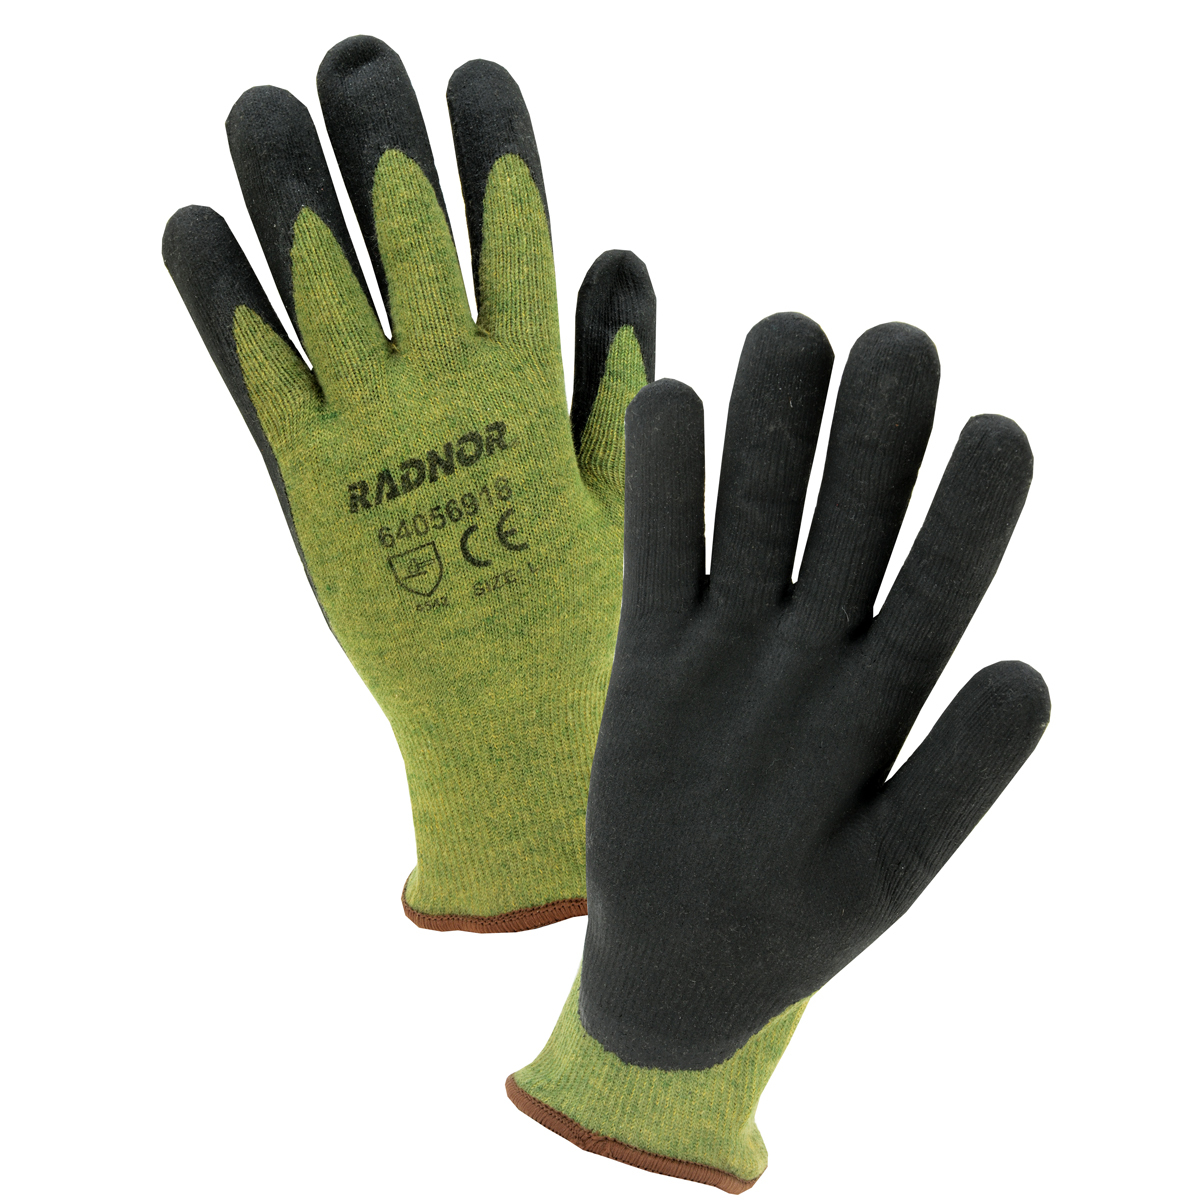 Radnor 64056919 X-Large 13 Gauge Kevlar Brand Fiber, Stainless Steel and Nitrile Palm Coated Cut Resistant Gloves with Knit Wrist, Stainless Steel